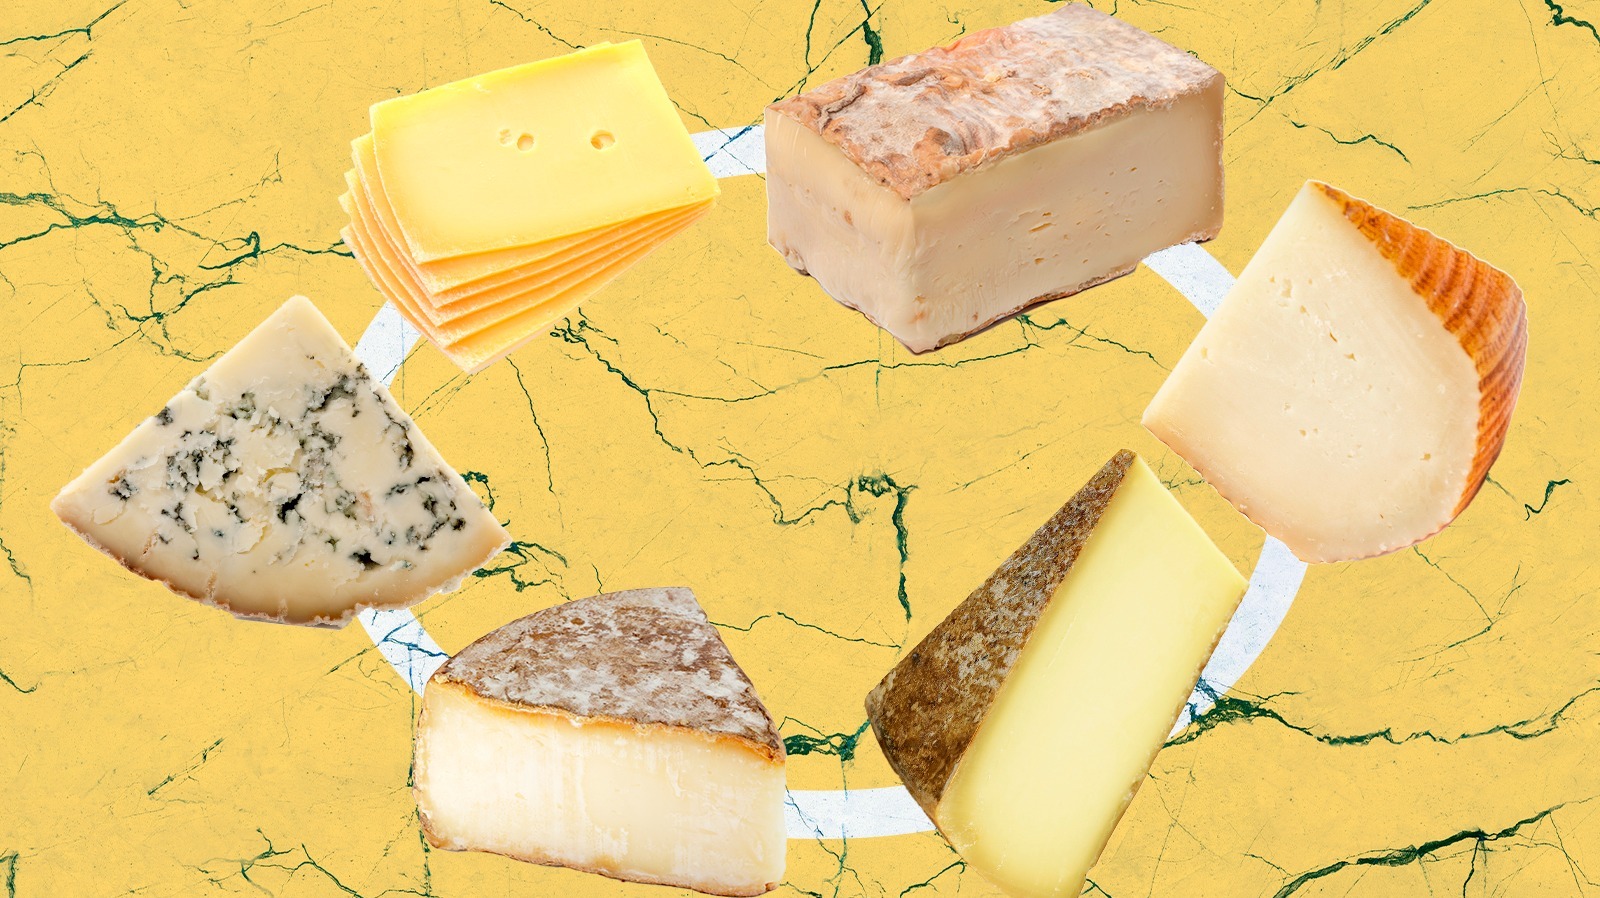 types of cheese